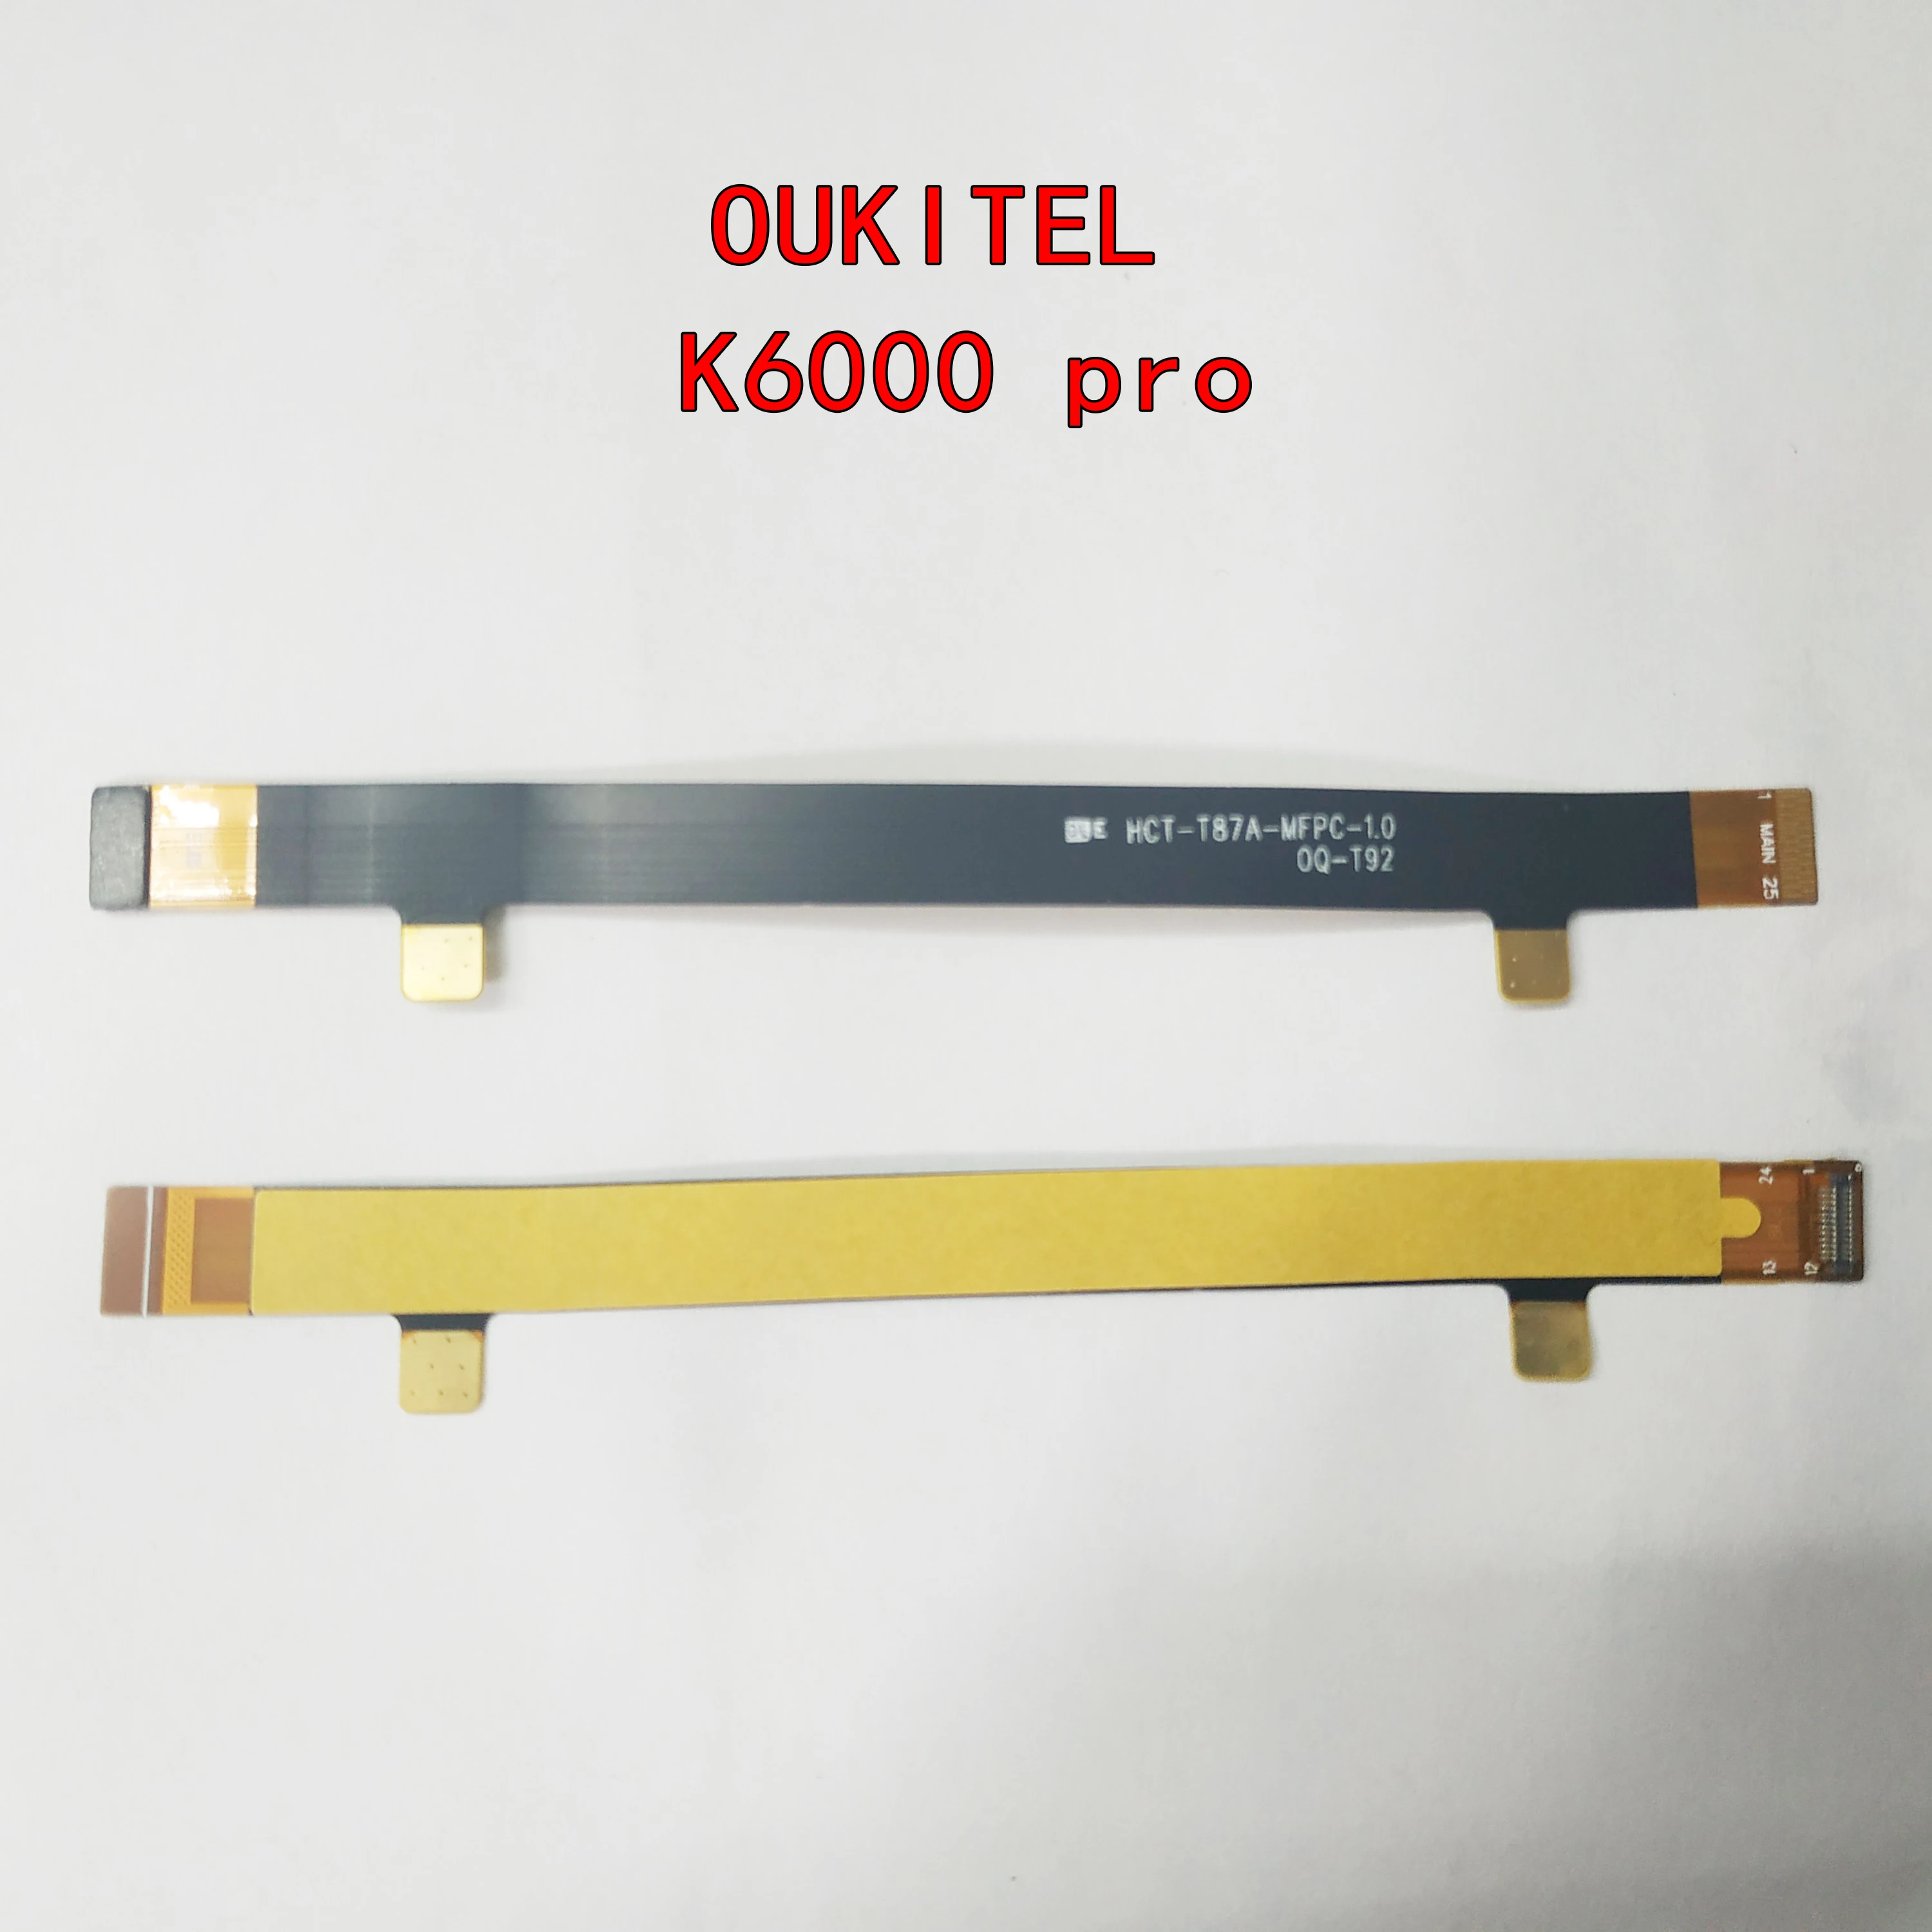 

Mainboard LCD Flex Cable For Oukitel K6000 Pro K6000 FPC Main Board Motherboard Flex Ribbom Cable Repair Replacement Parts